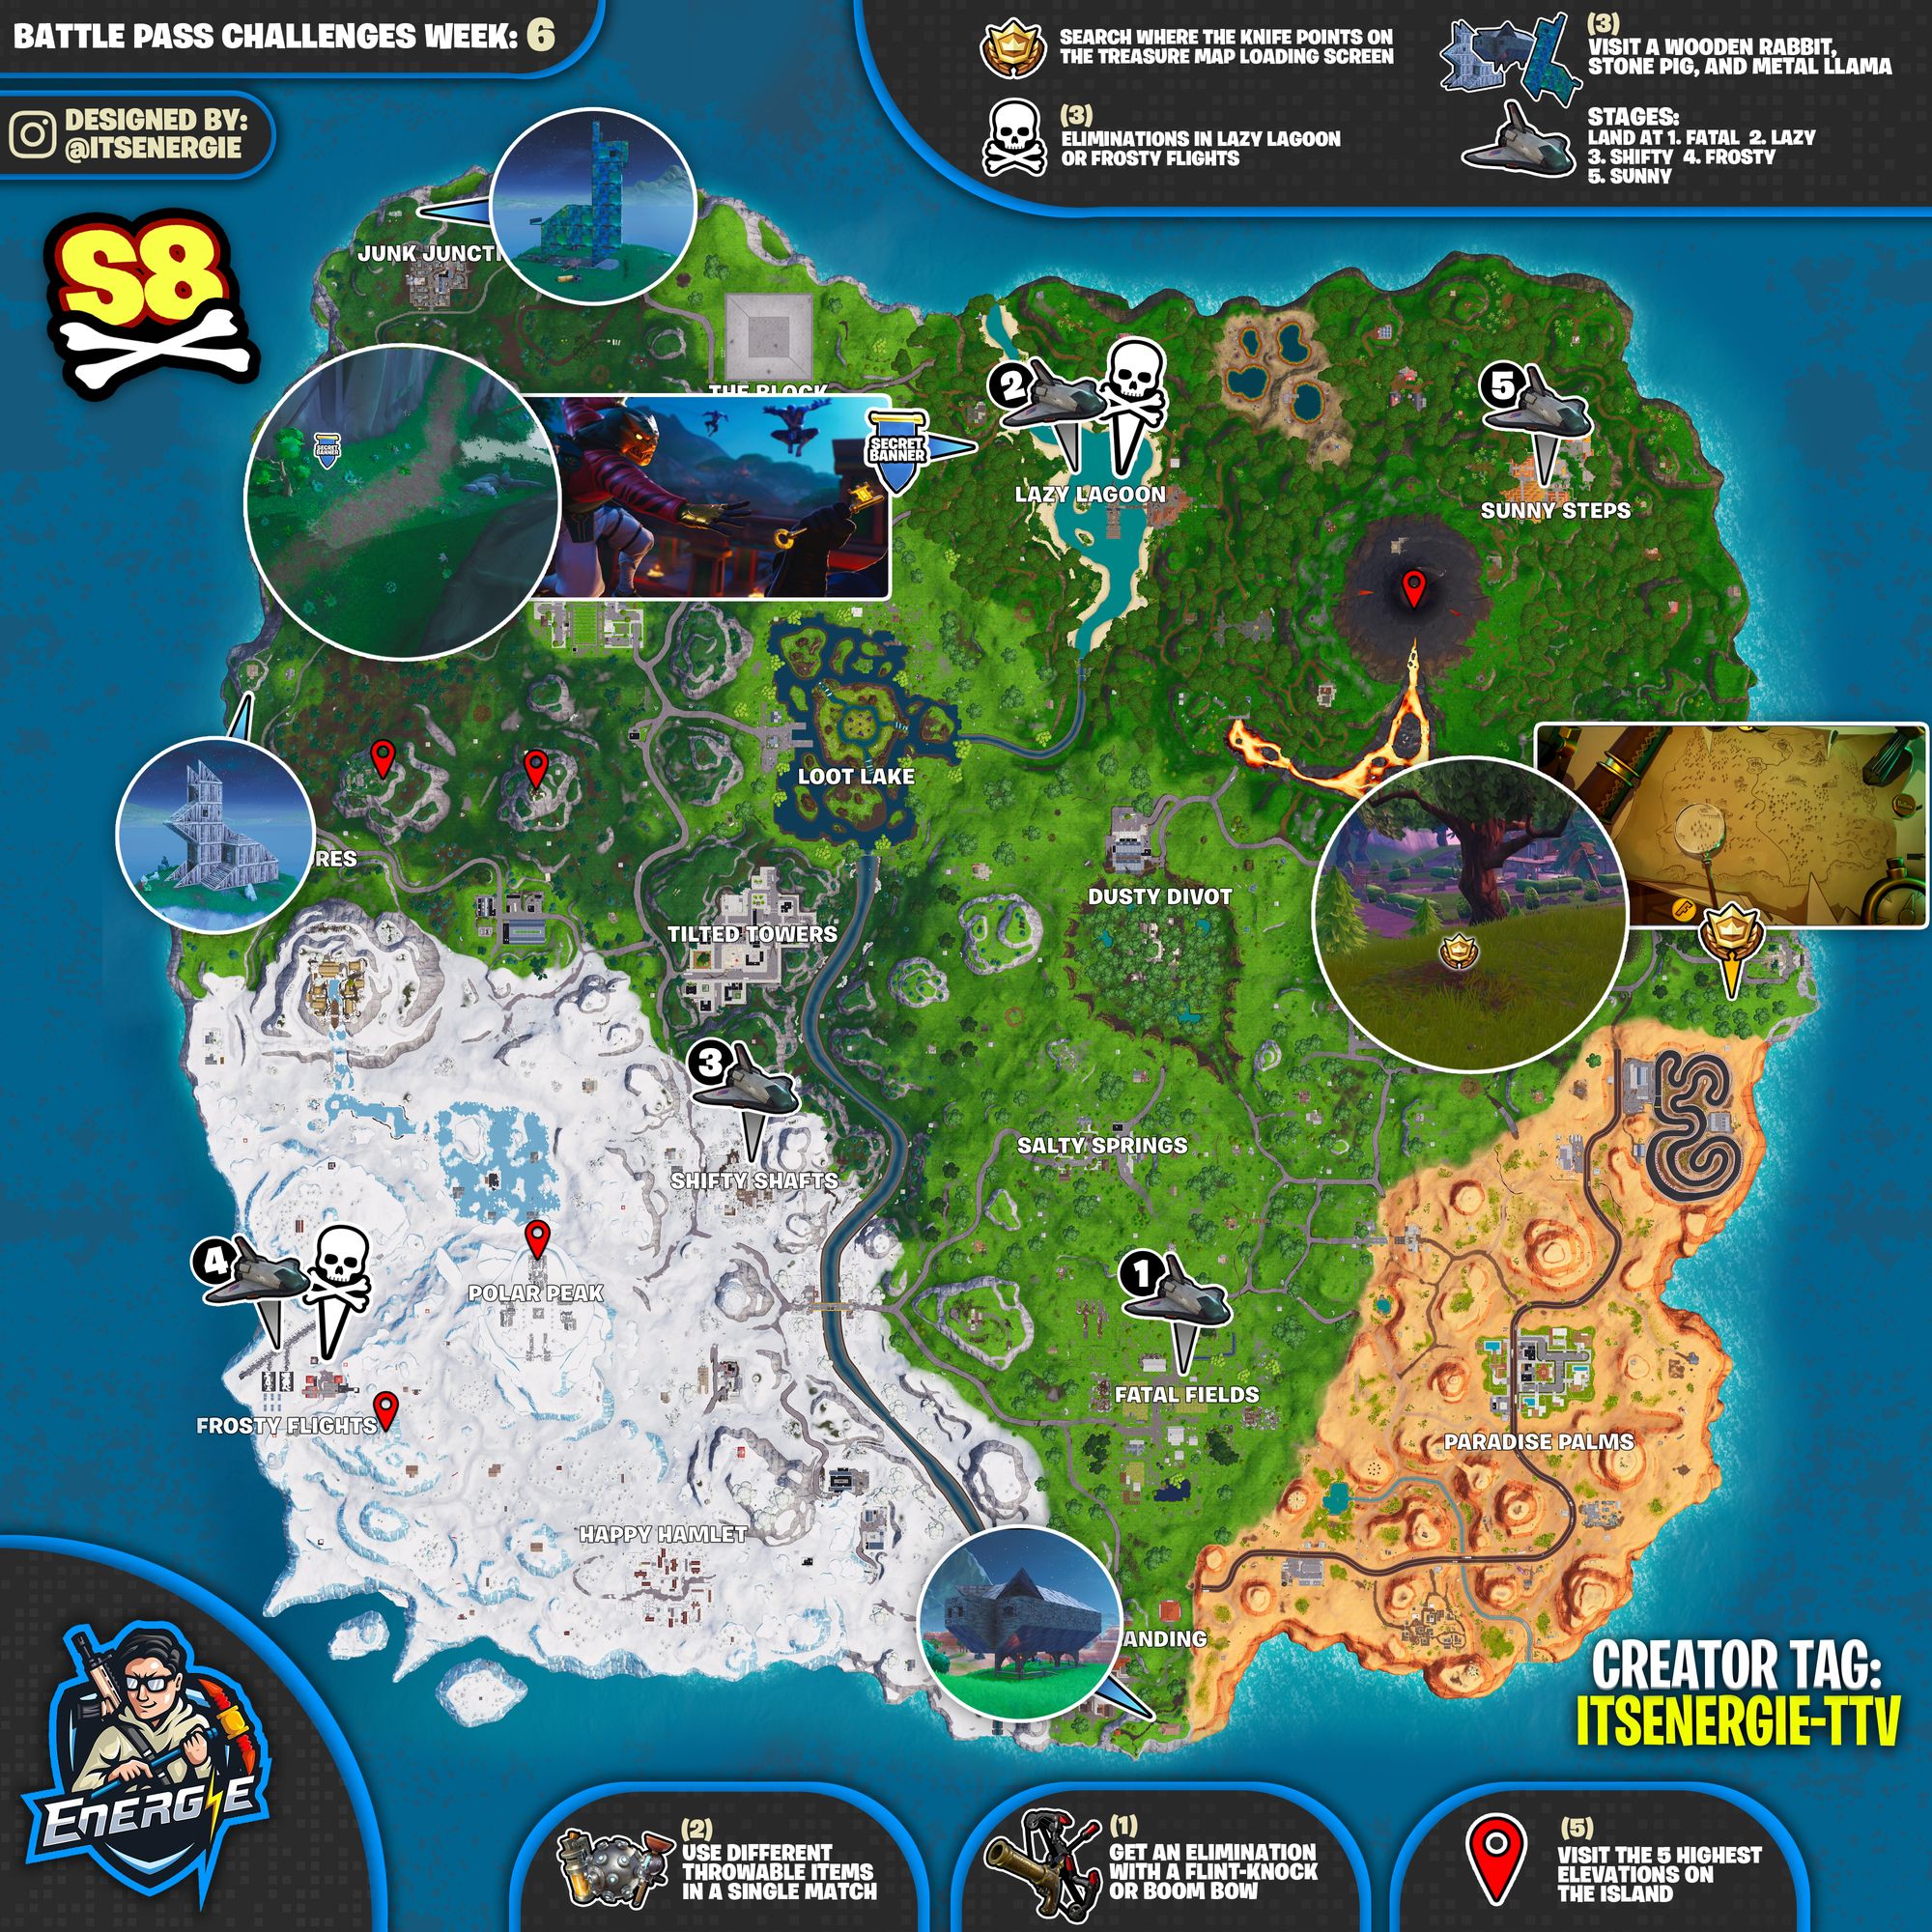 struggling with this week s challenges the cheat sheet mastermind itsenergie has put together another cheat sheet to make our lives a little bit easier - fortnite season 5 cheat sheet